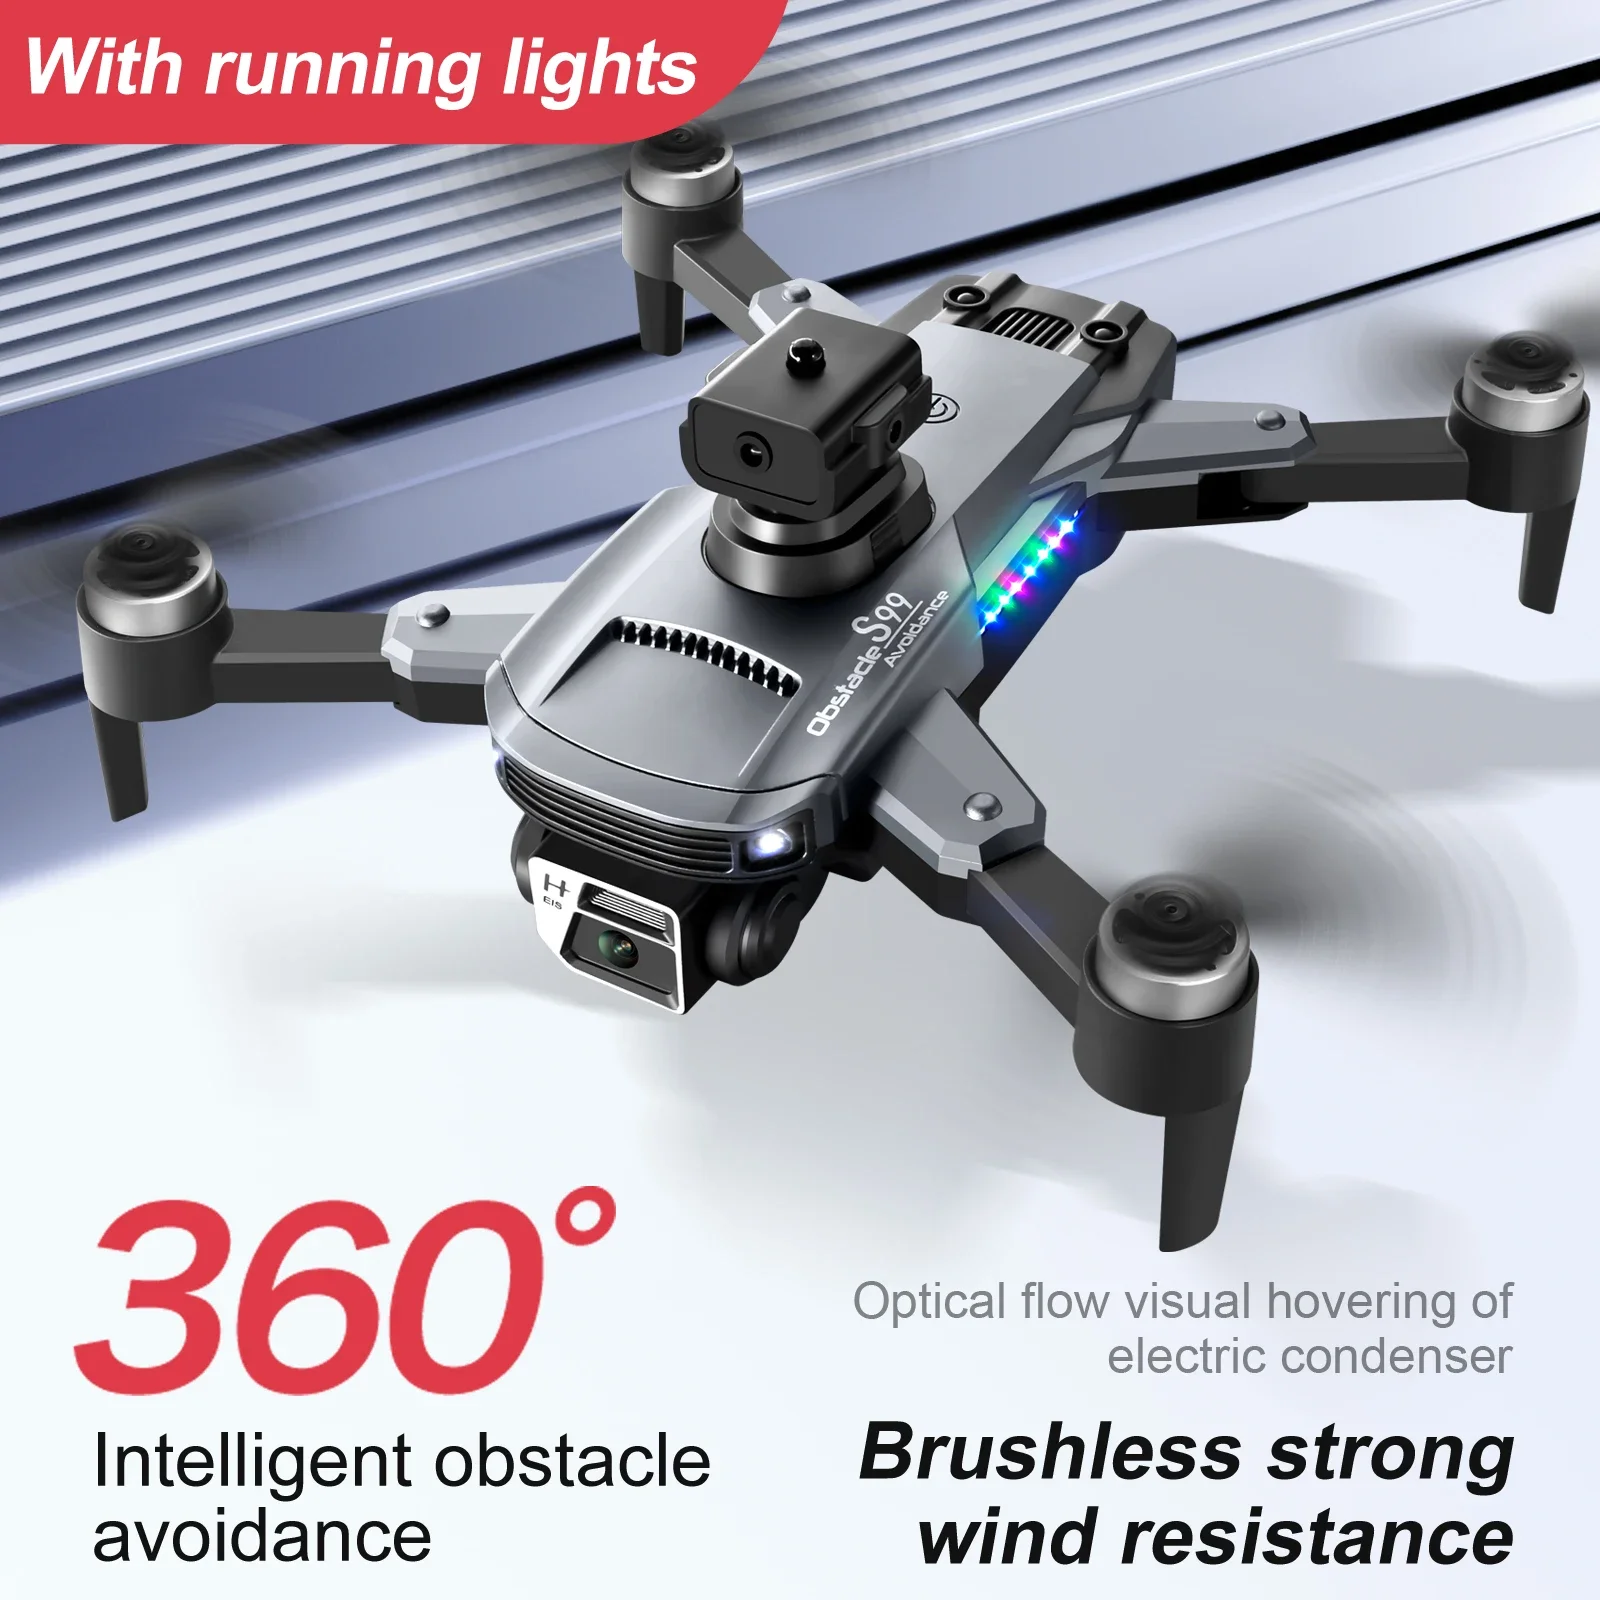 

S99 Drone 4K Profession Obstacle Avoidance Dual Camera RC Quadcopter Drone FPV 2.4G WIFI Light Remote Control Helicopter Toys